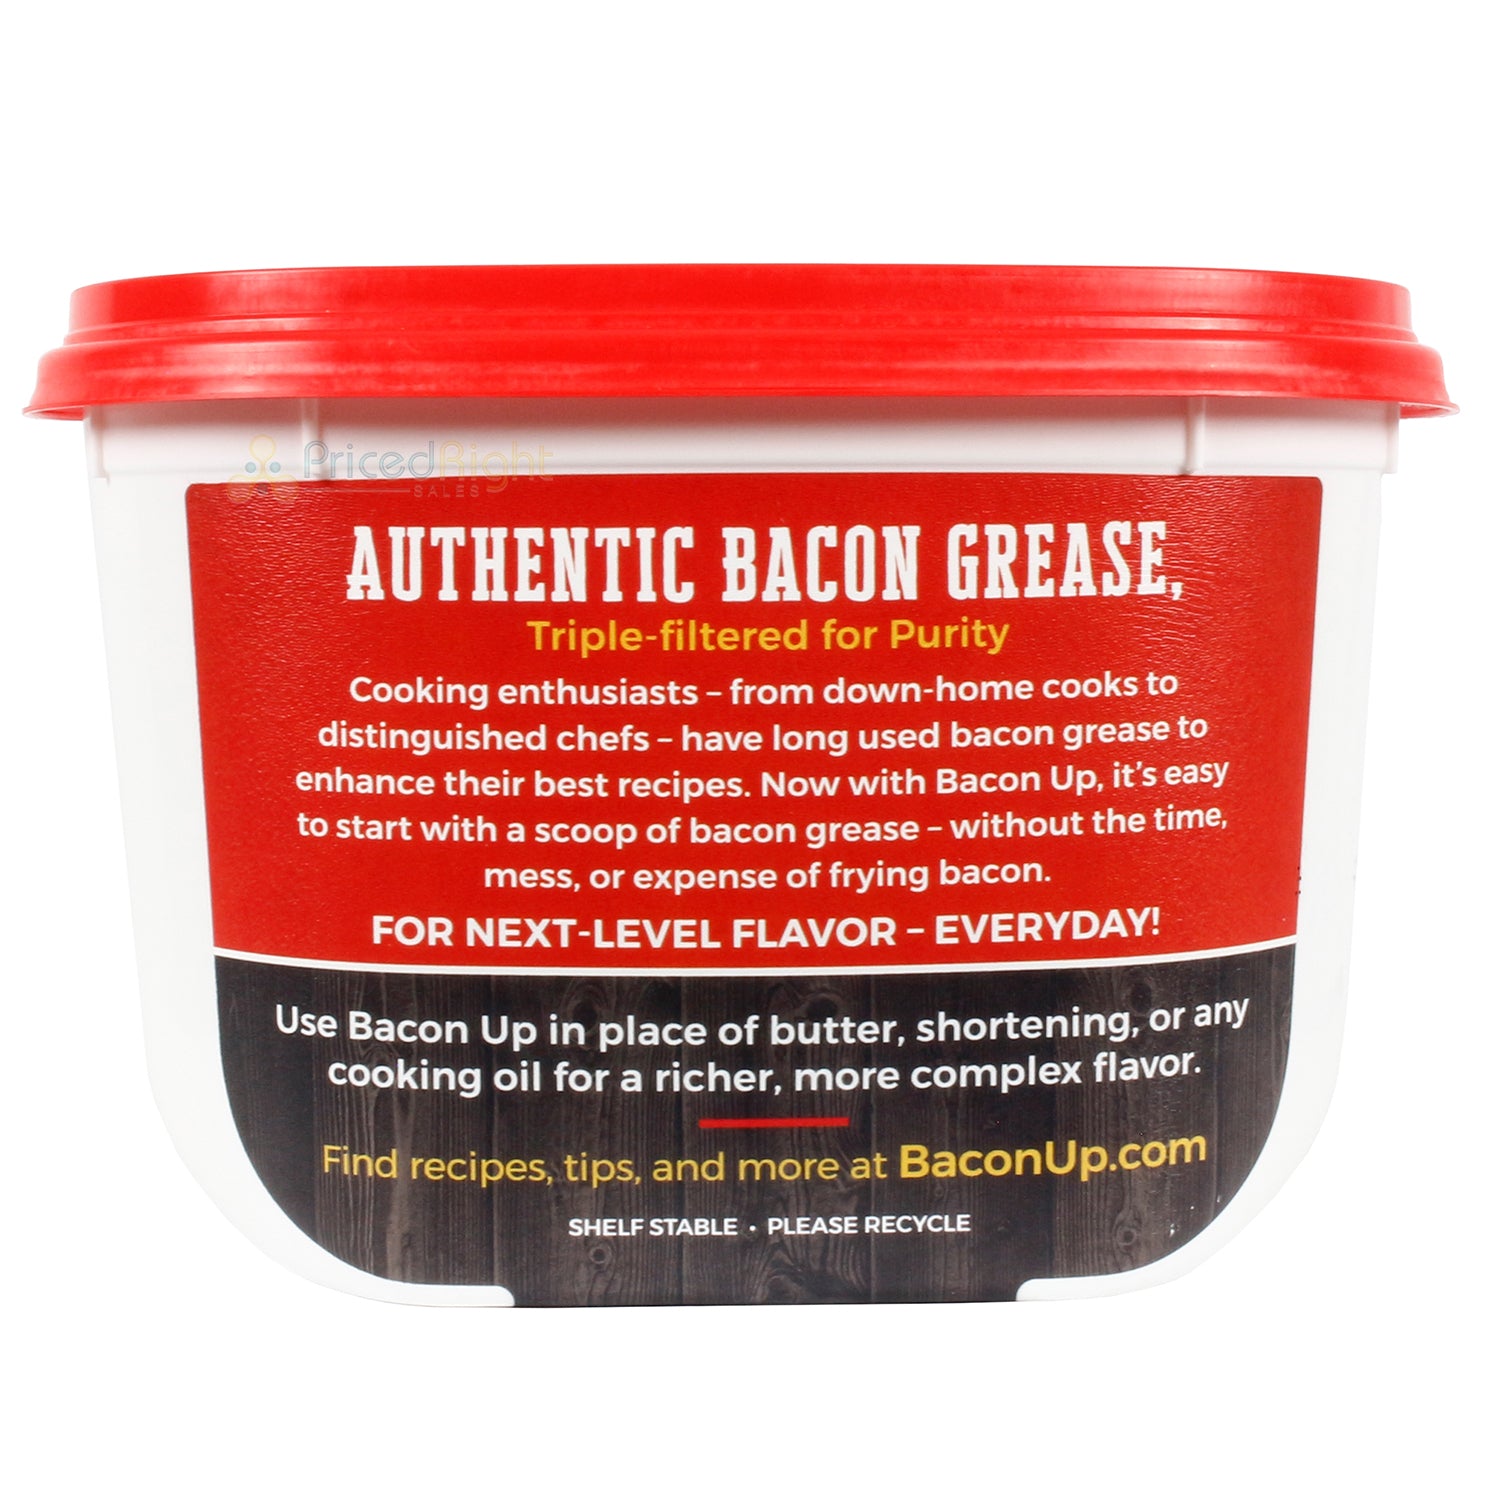 Bacon Up Bacon Grease for Cooking - 9lb Pail of Authentic Bacon Fat for Cooking Frying and Baking - Triple-Filtered for Purity N